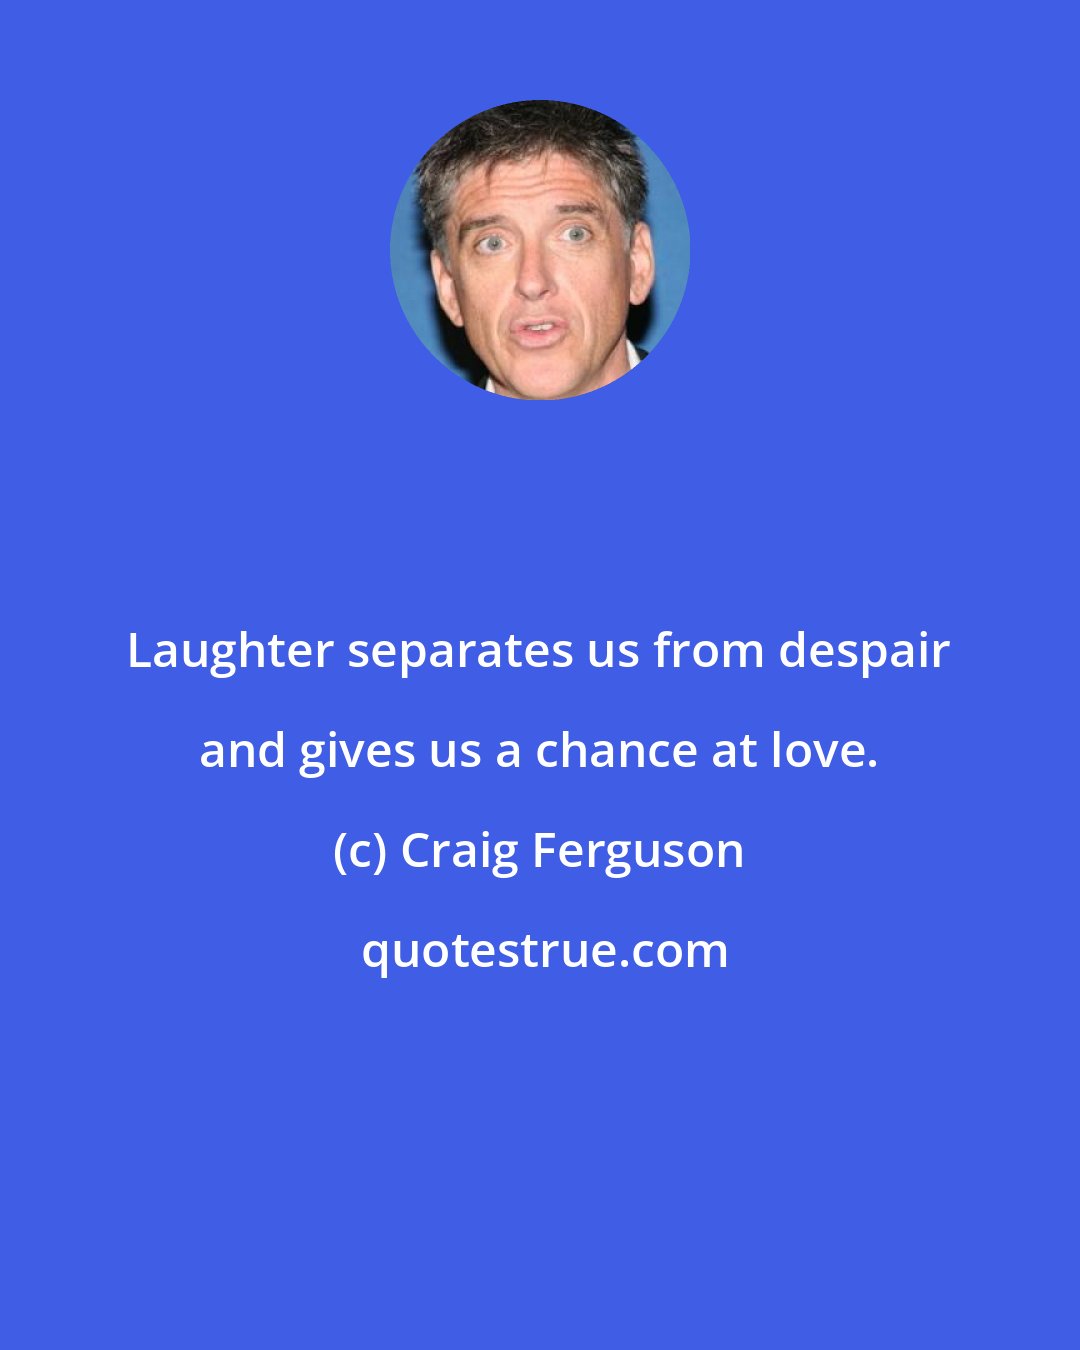 Craig Ferguson: Laughter separates us from despair and gives us a chance at love.